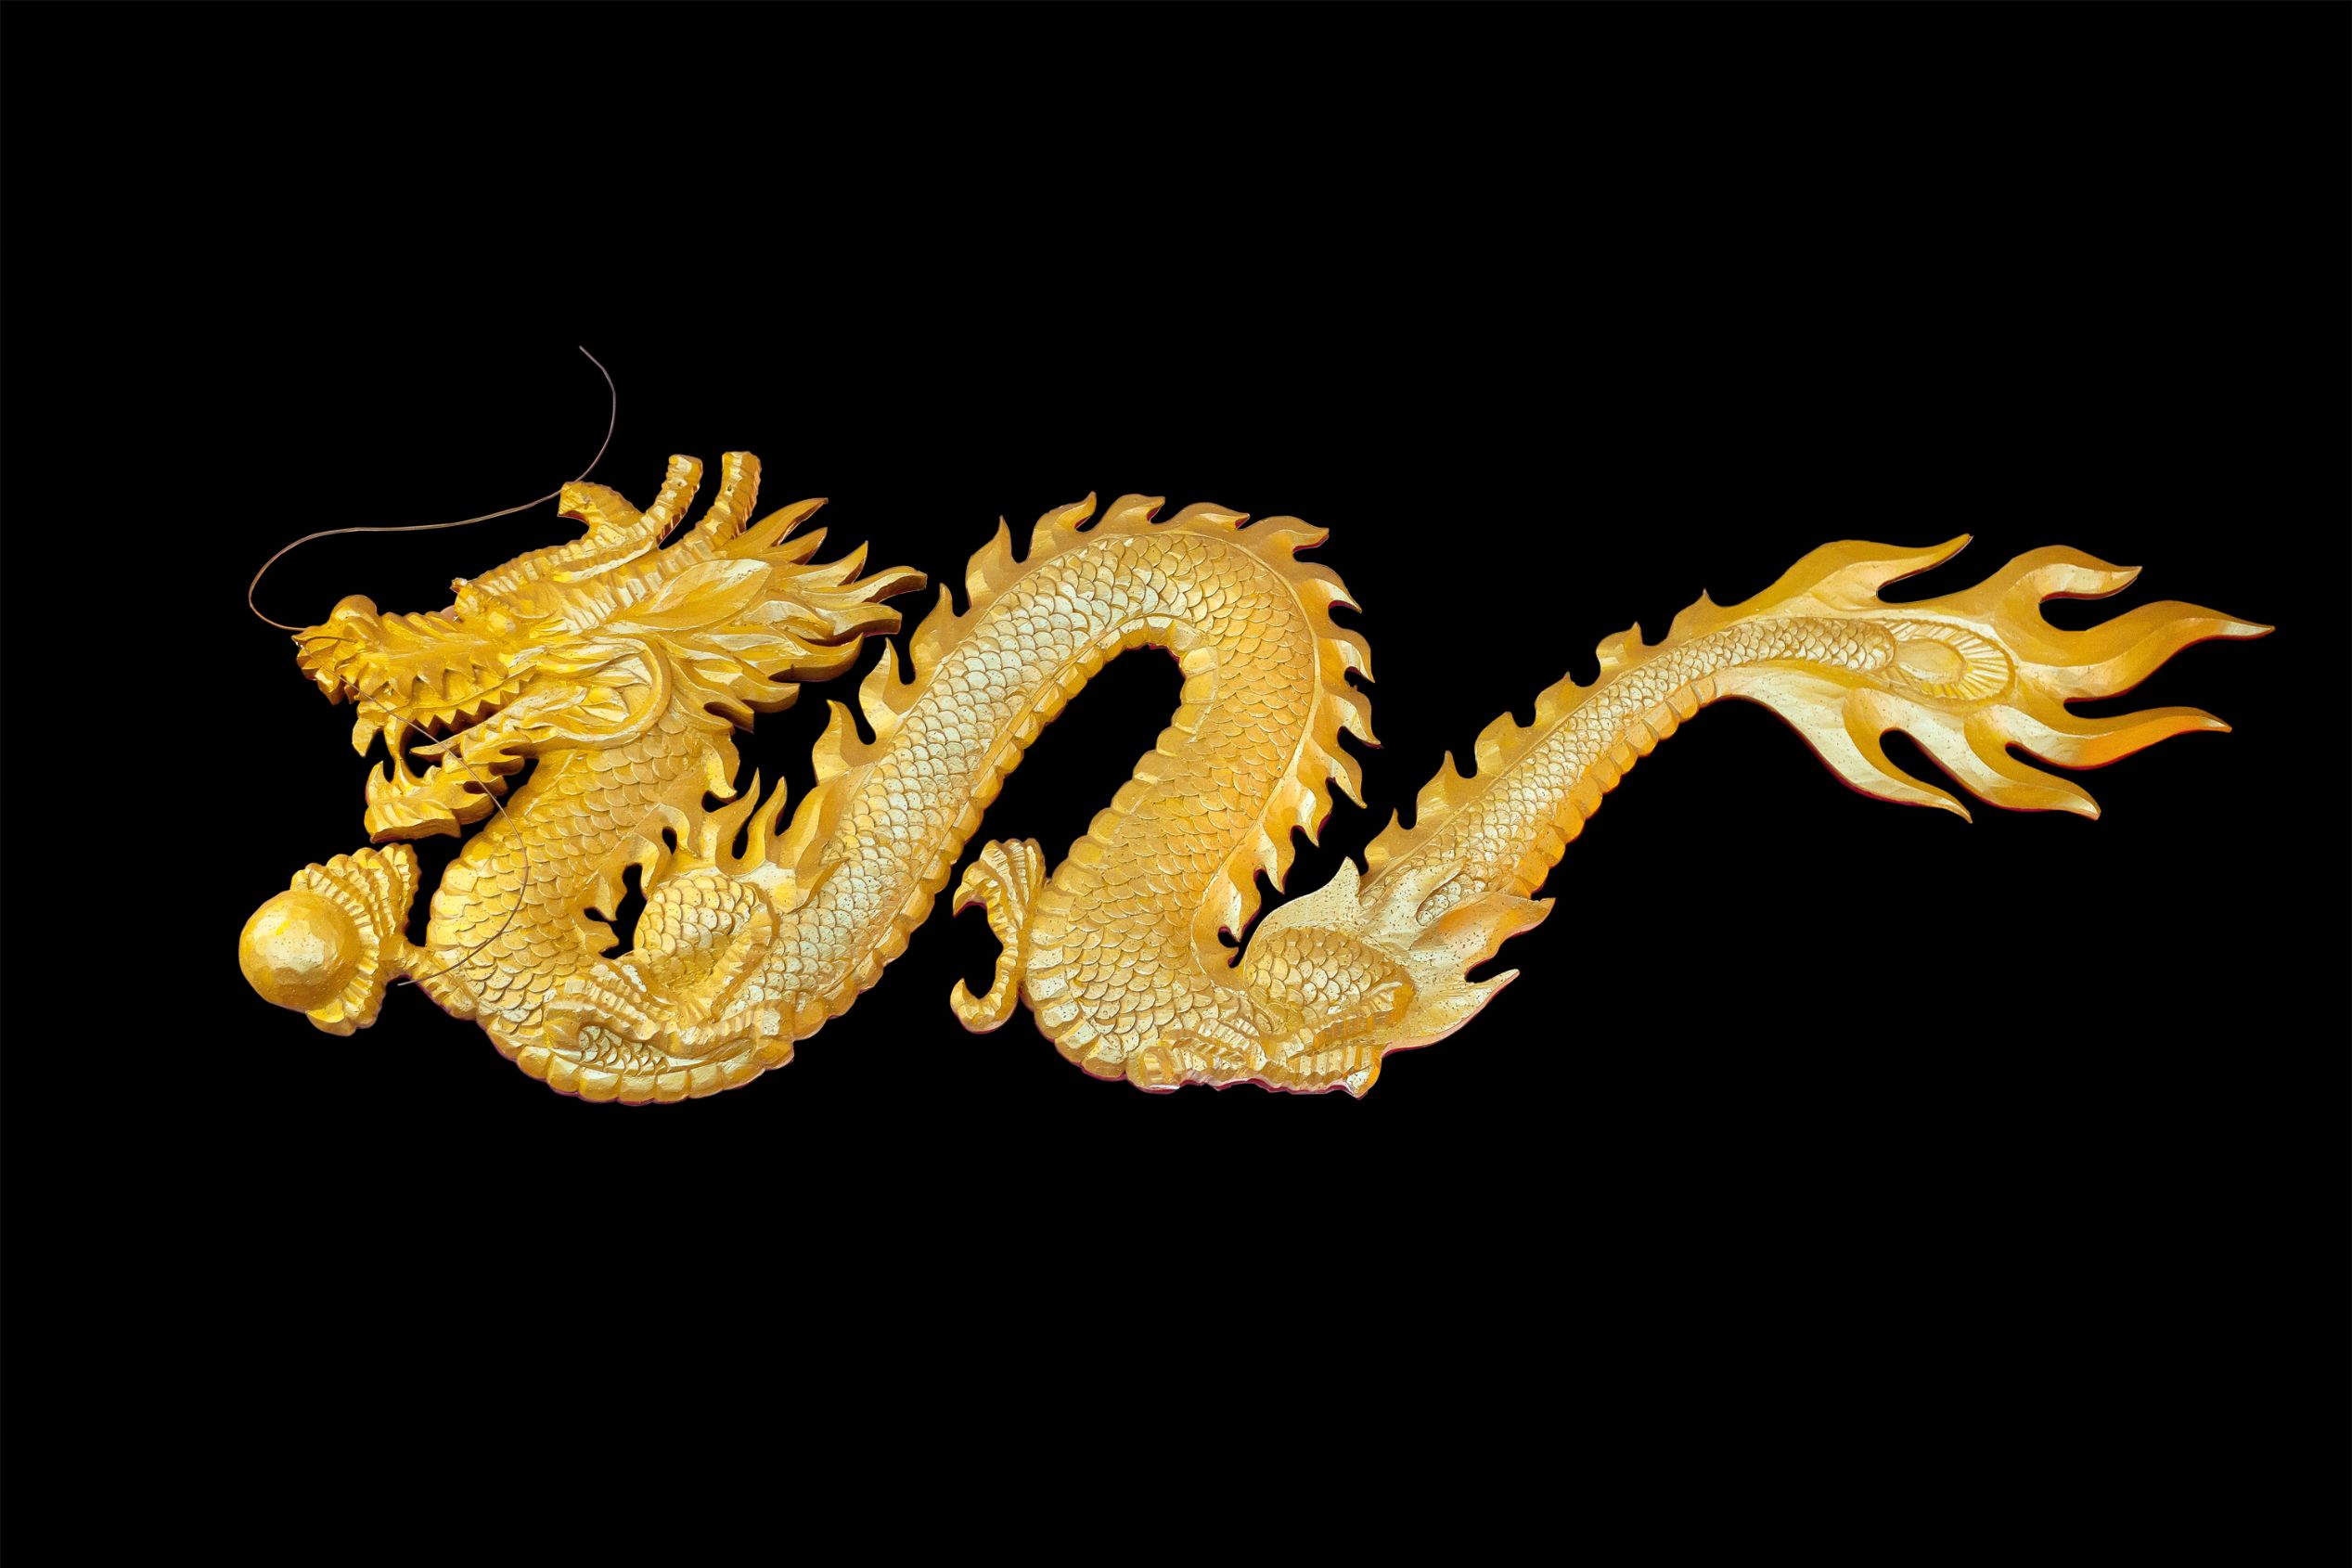 Feng Shui Dragon Statue Meaning, Types, Placement & More